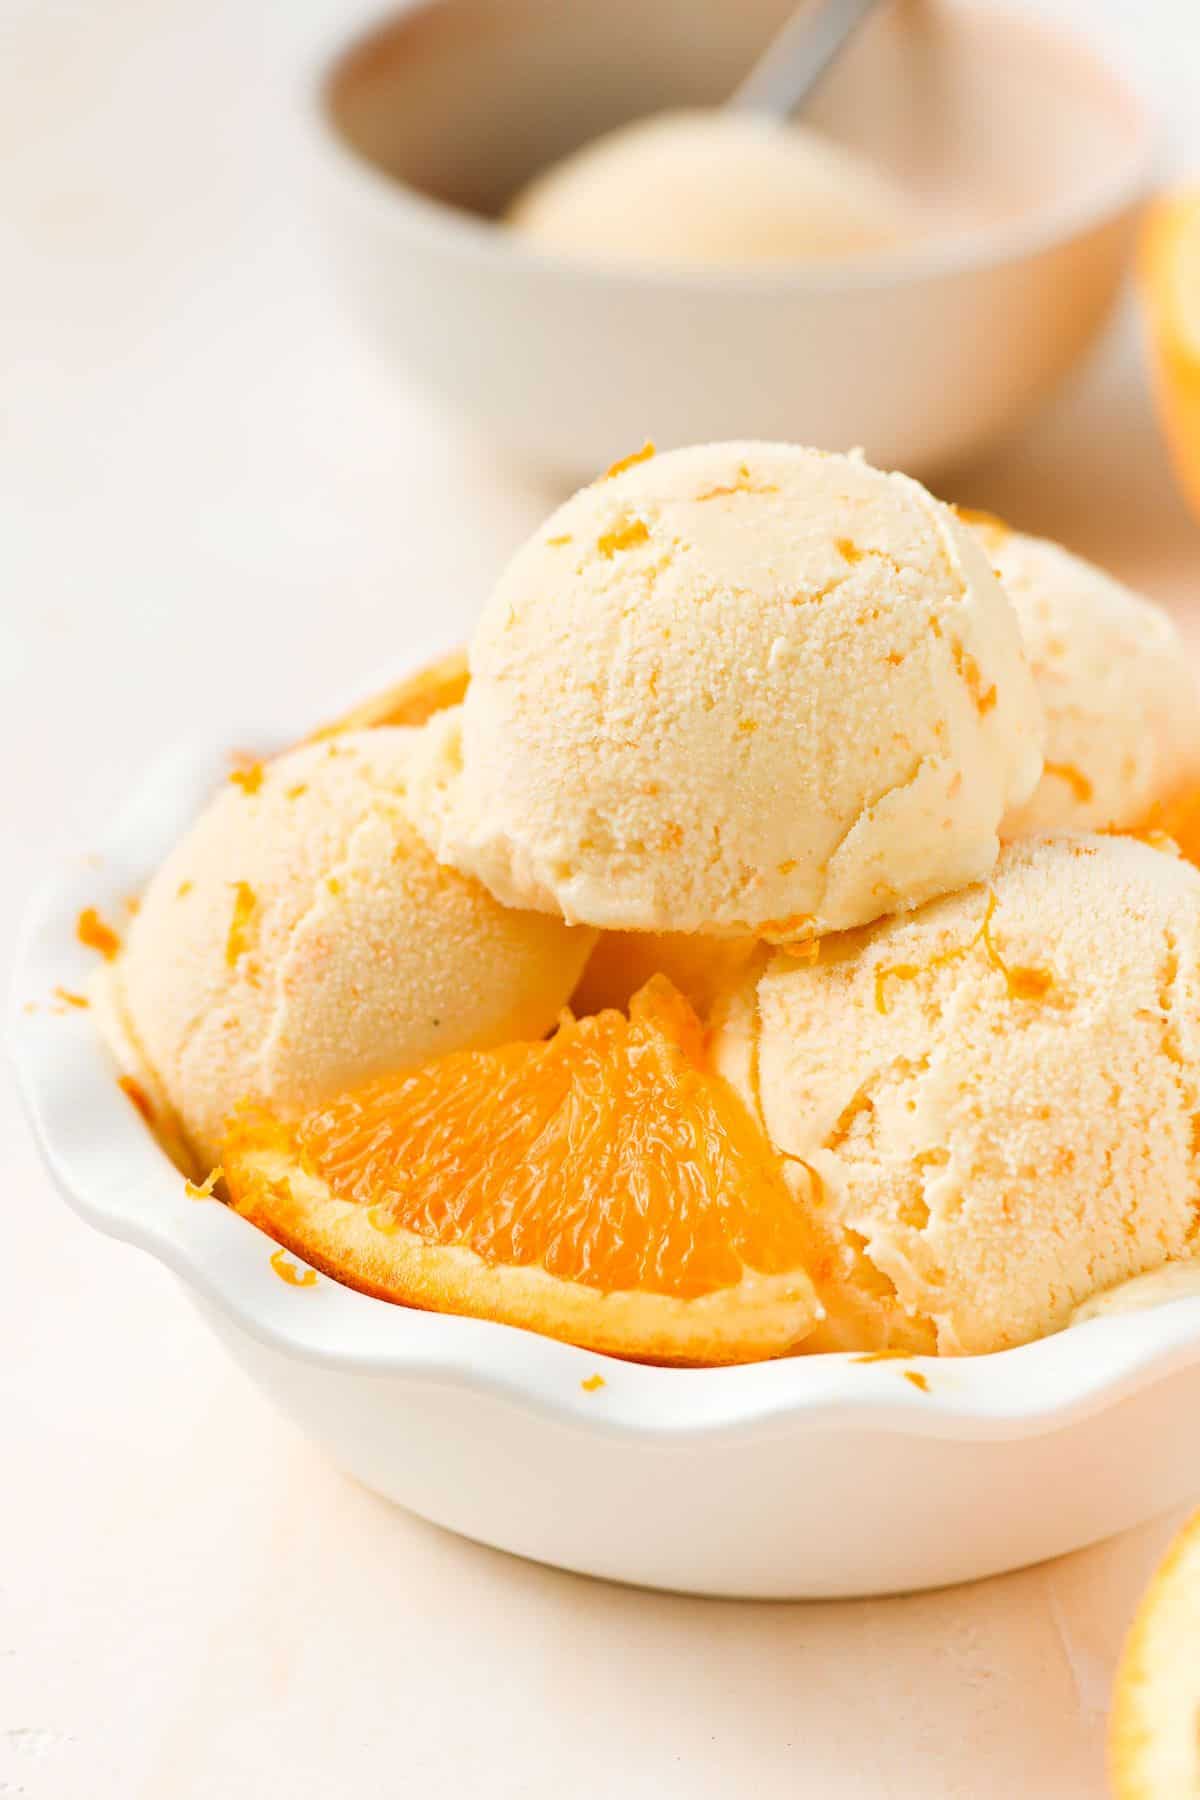 Round white bowl of ice cream with four scoops and some orange pieces.